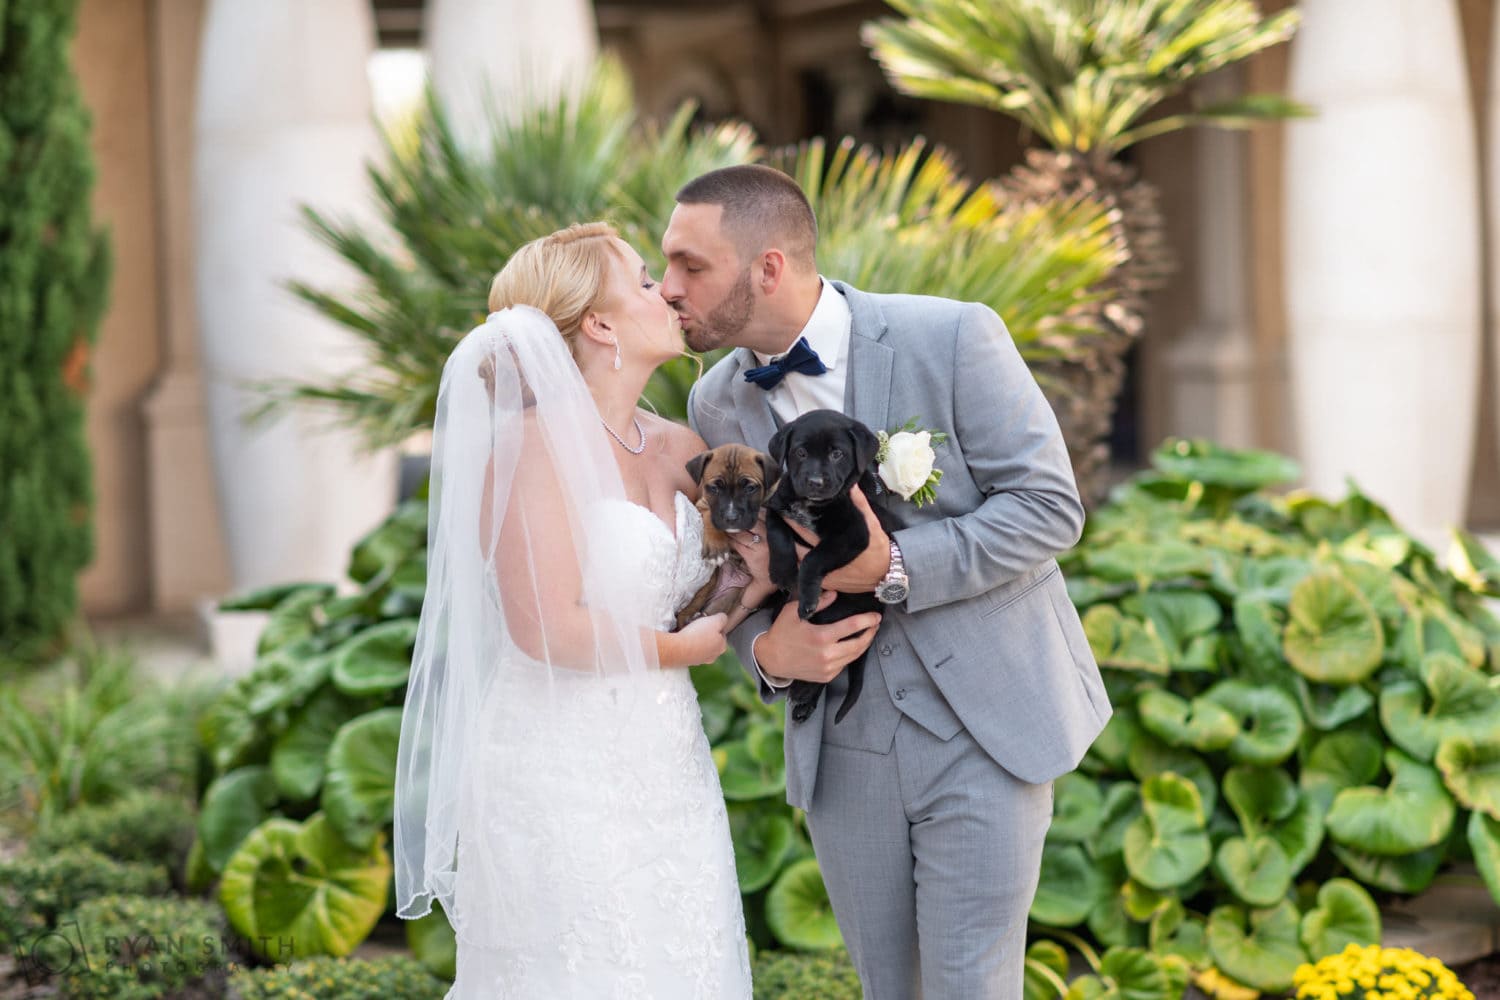 Bride and groom kissing with the puppies - 21 Main Events - North Myrtle Beach